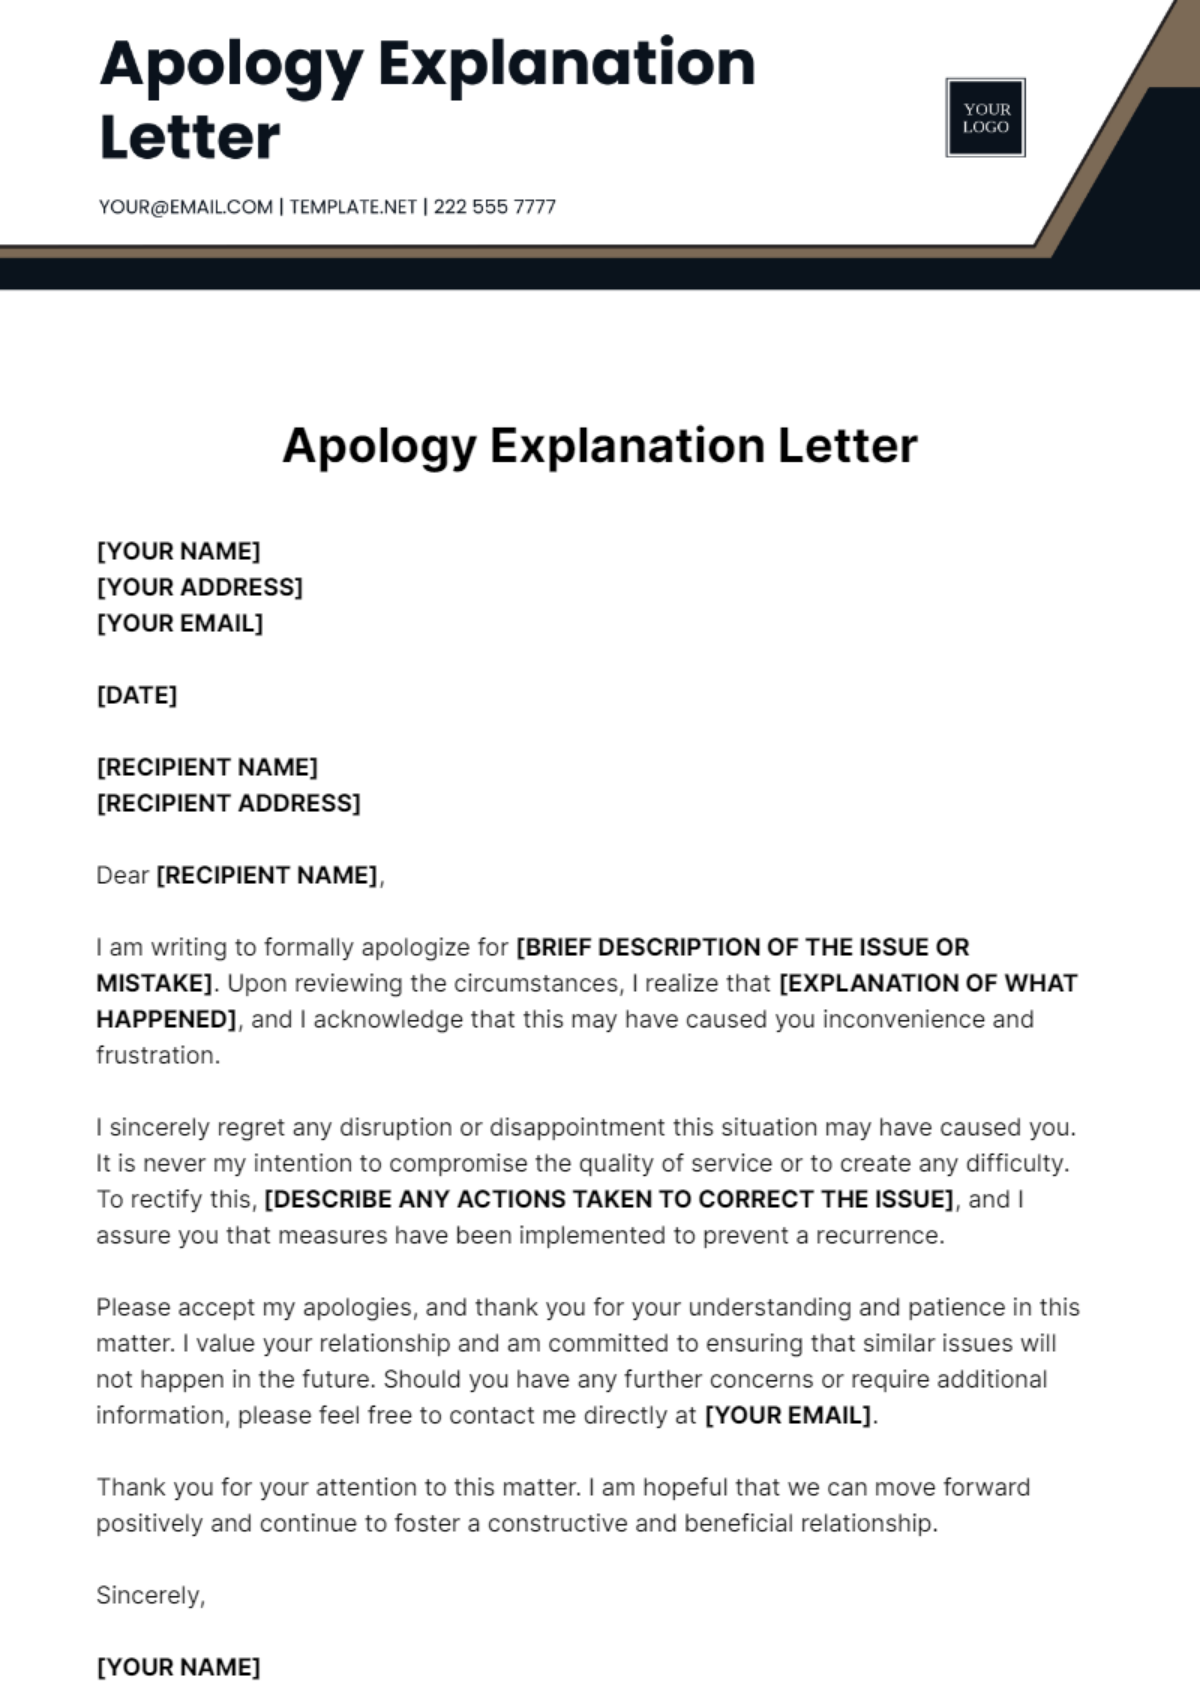 Apology Explanation Letter Template